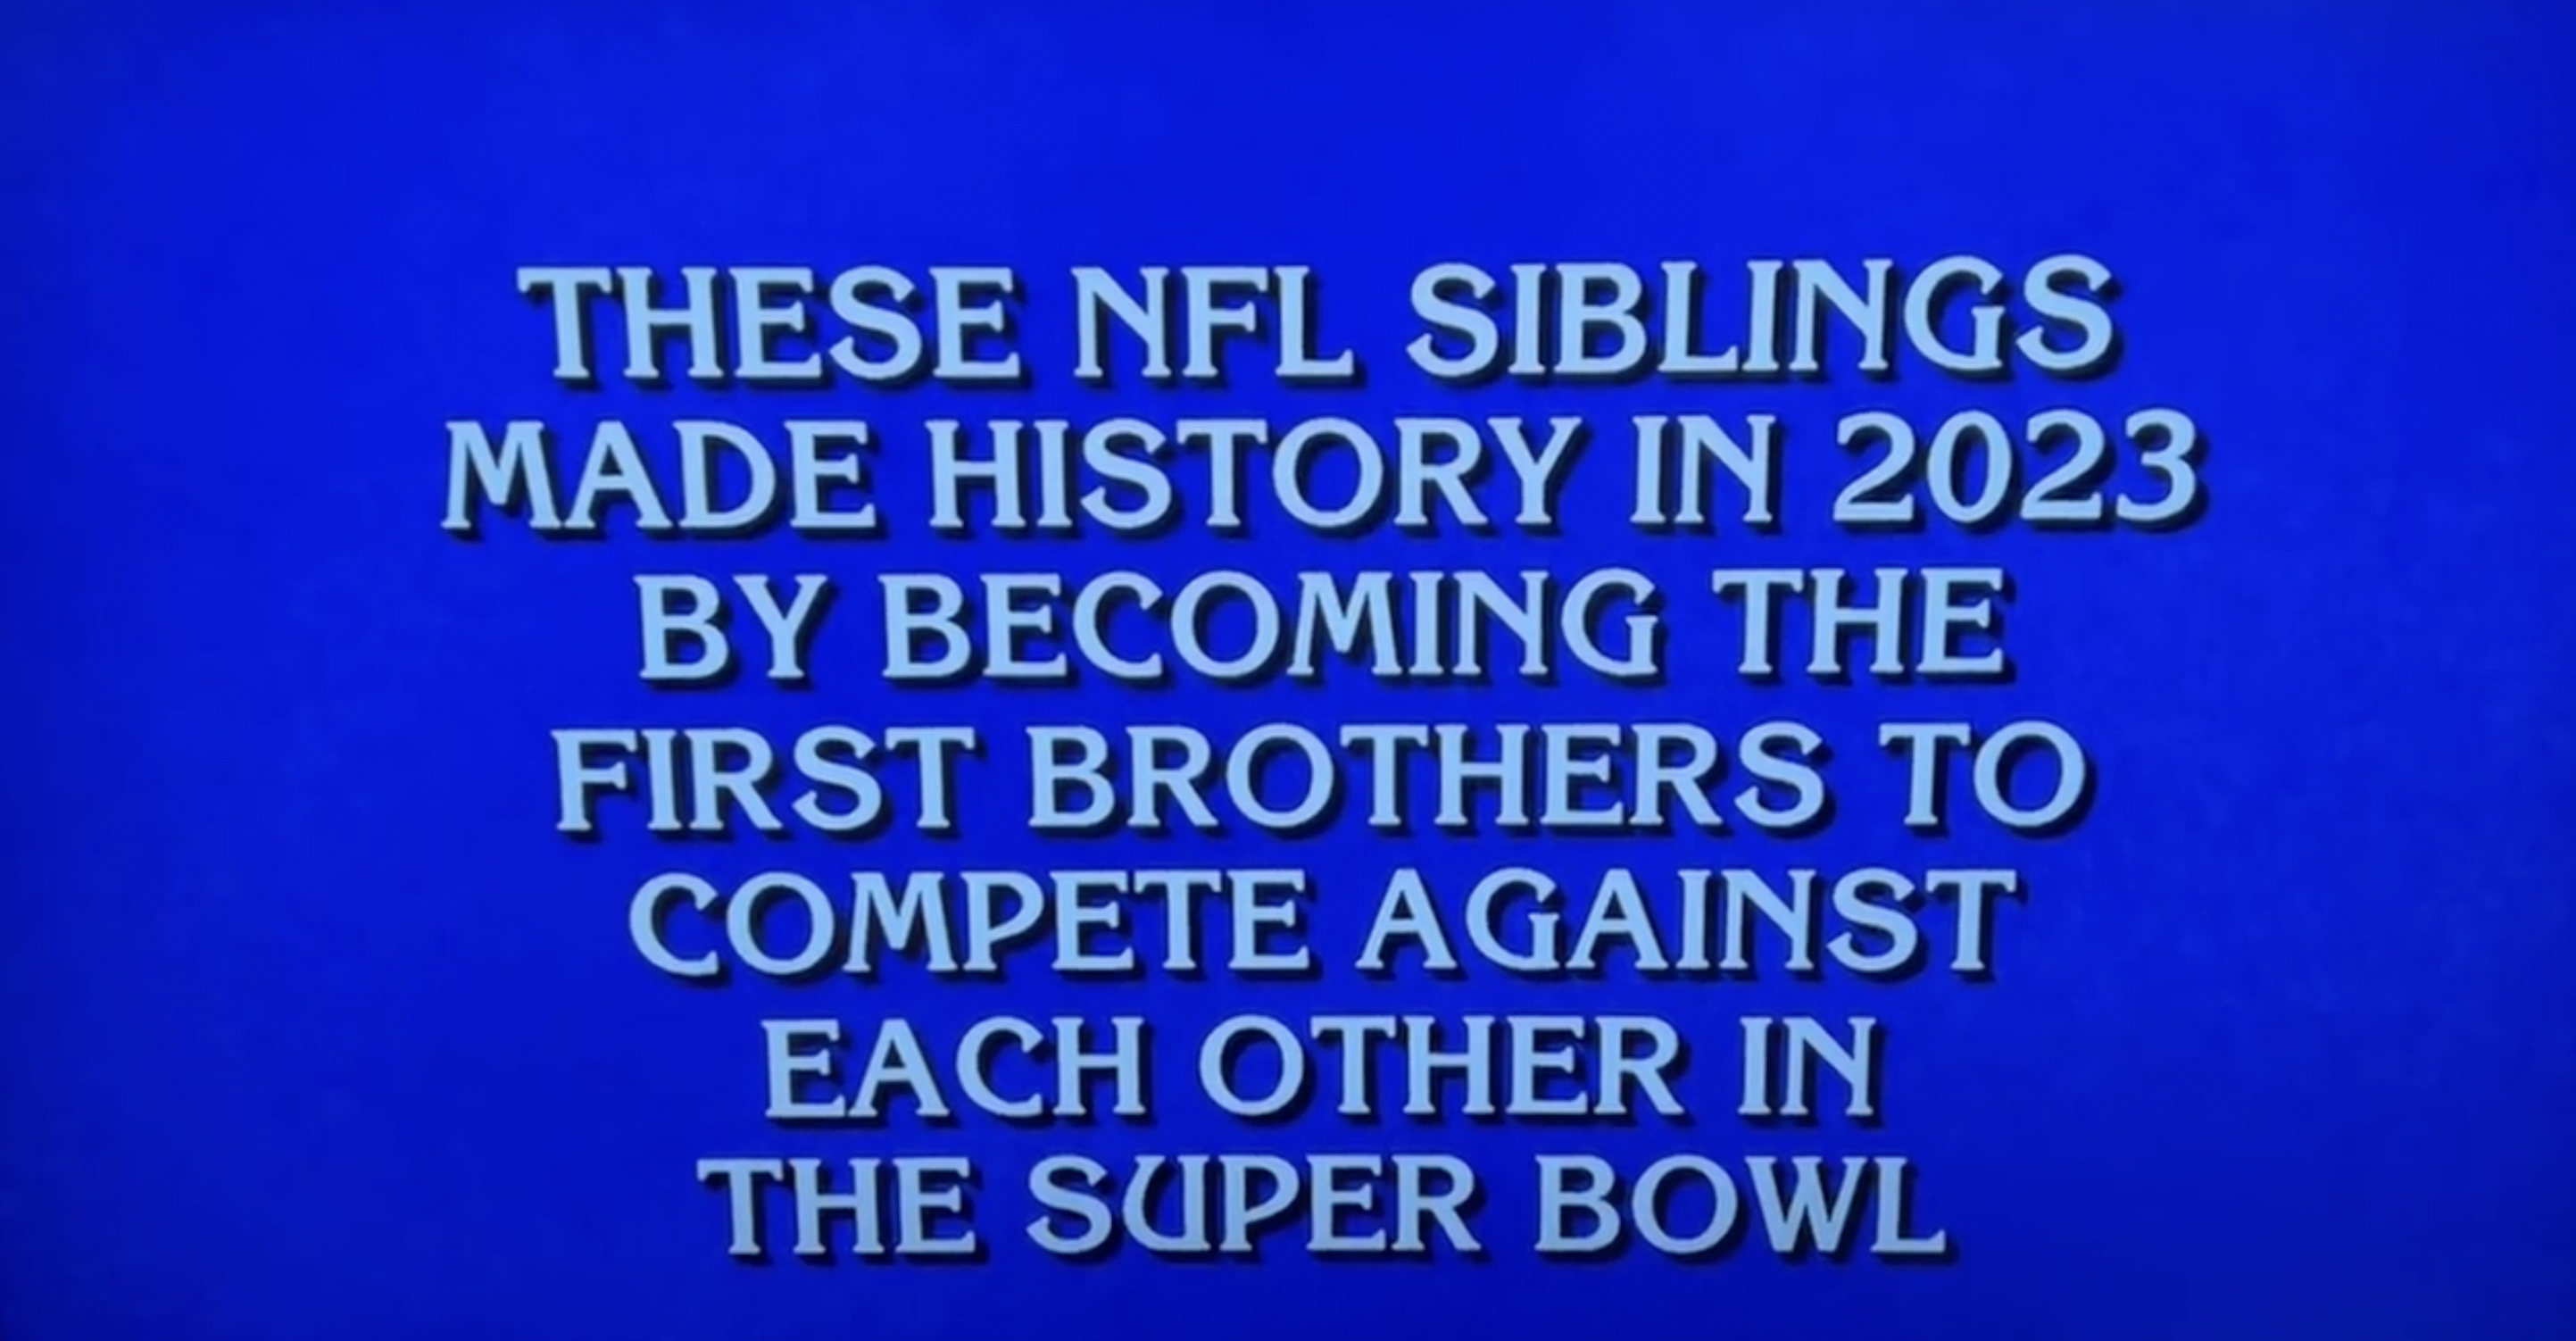 The question referred to the hunky 33-year-old and his NFL rival brother